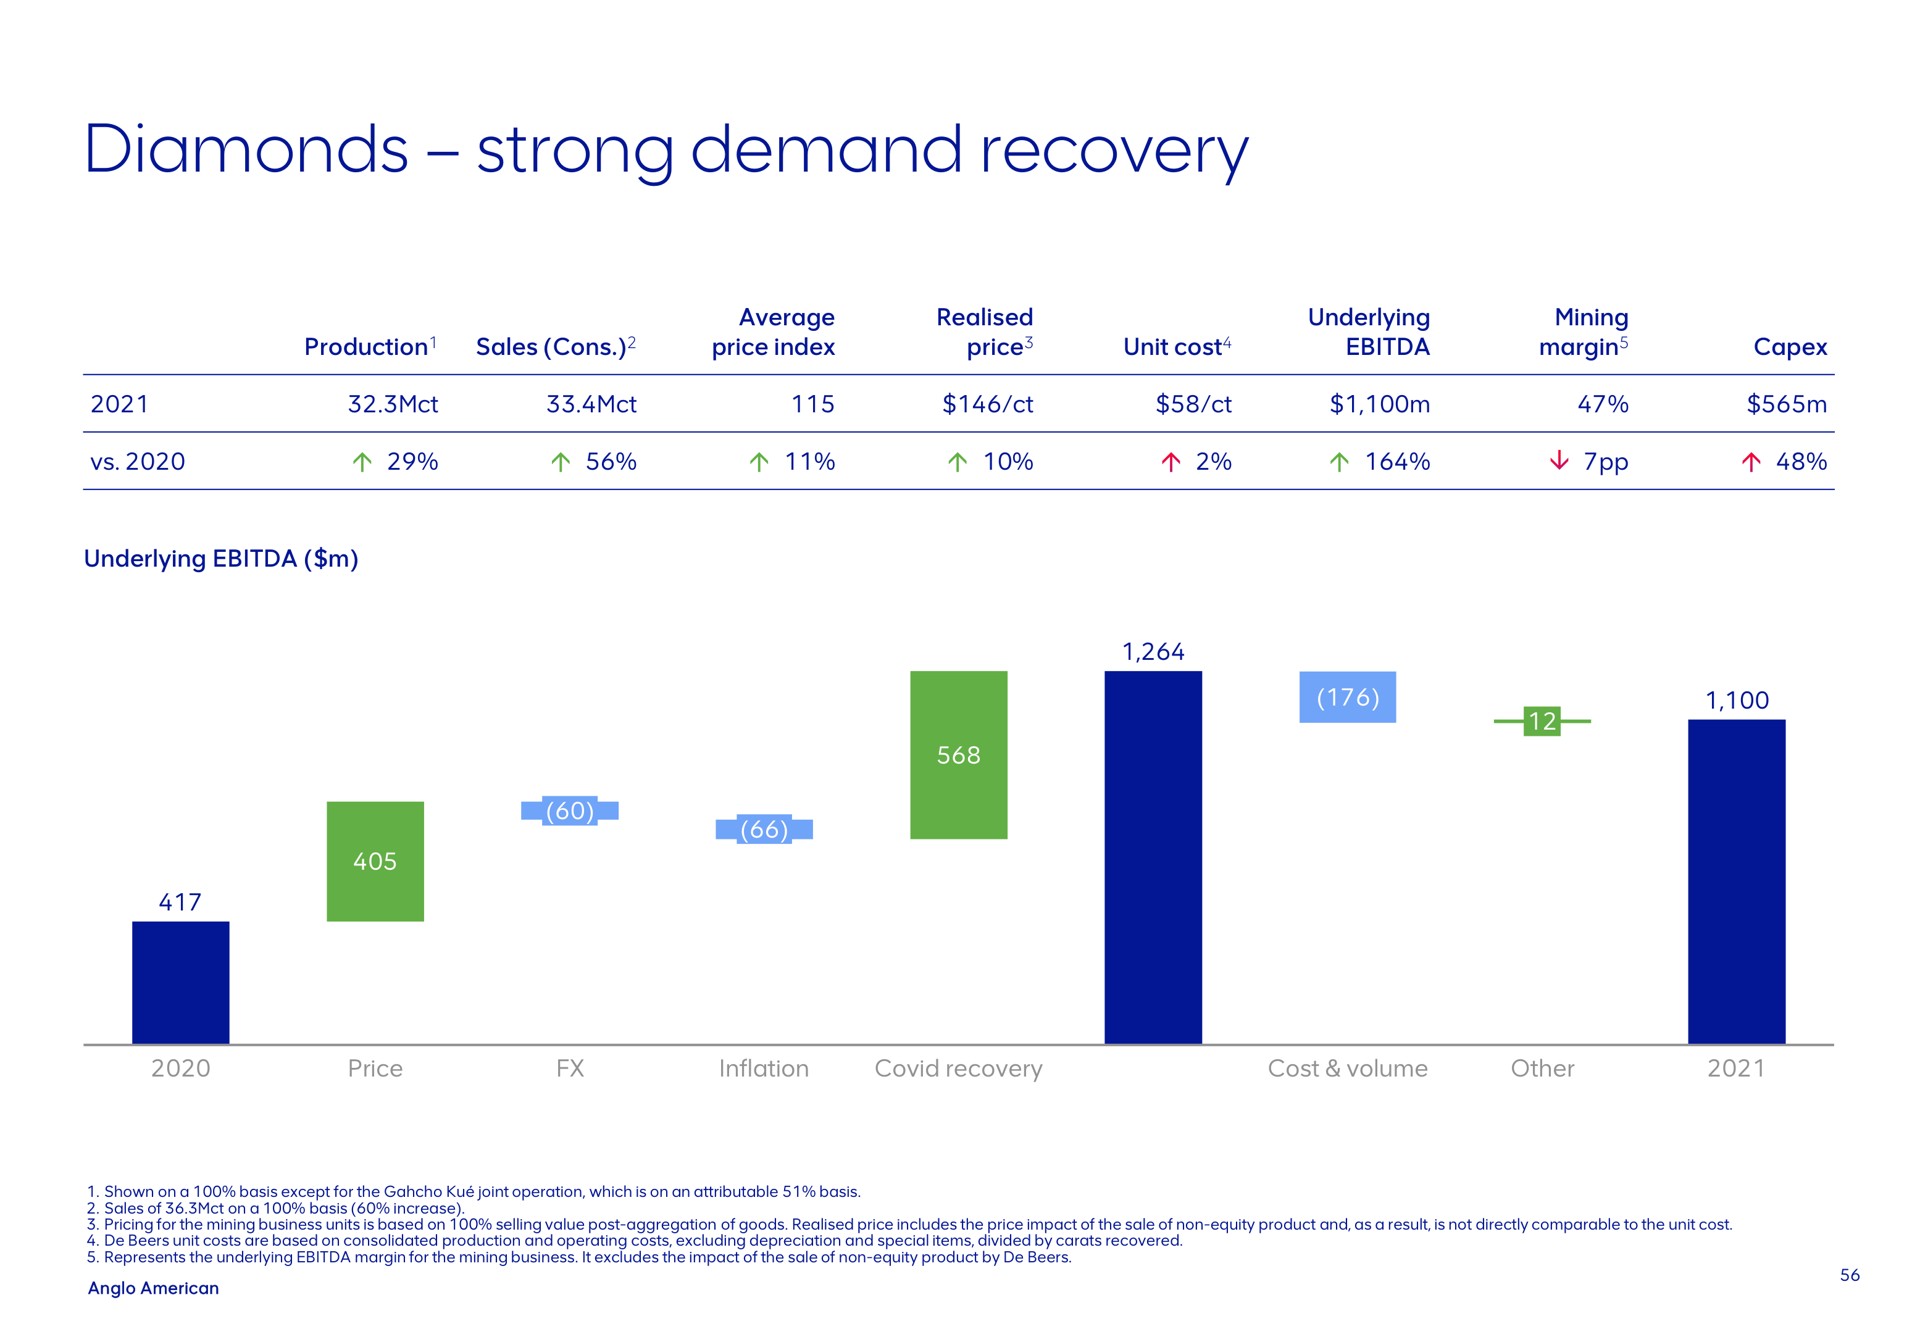 diamonds strong demand recovery | AngloAmerican